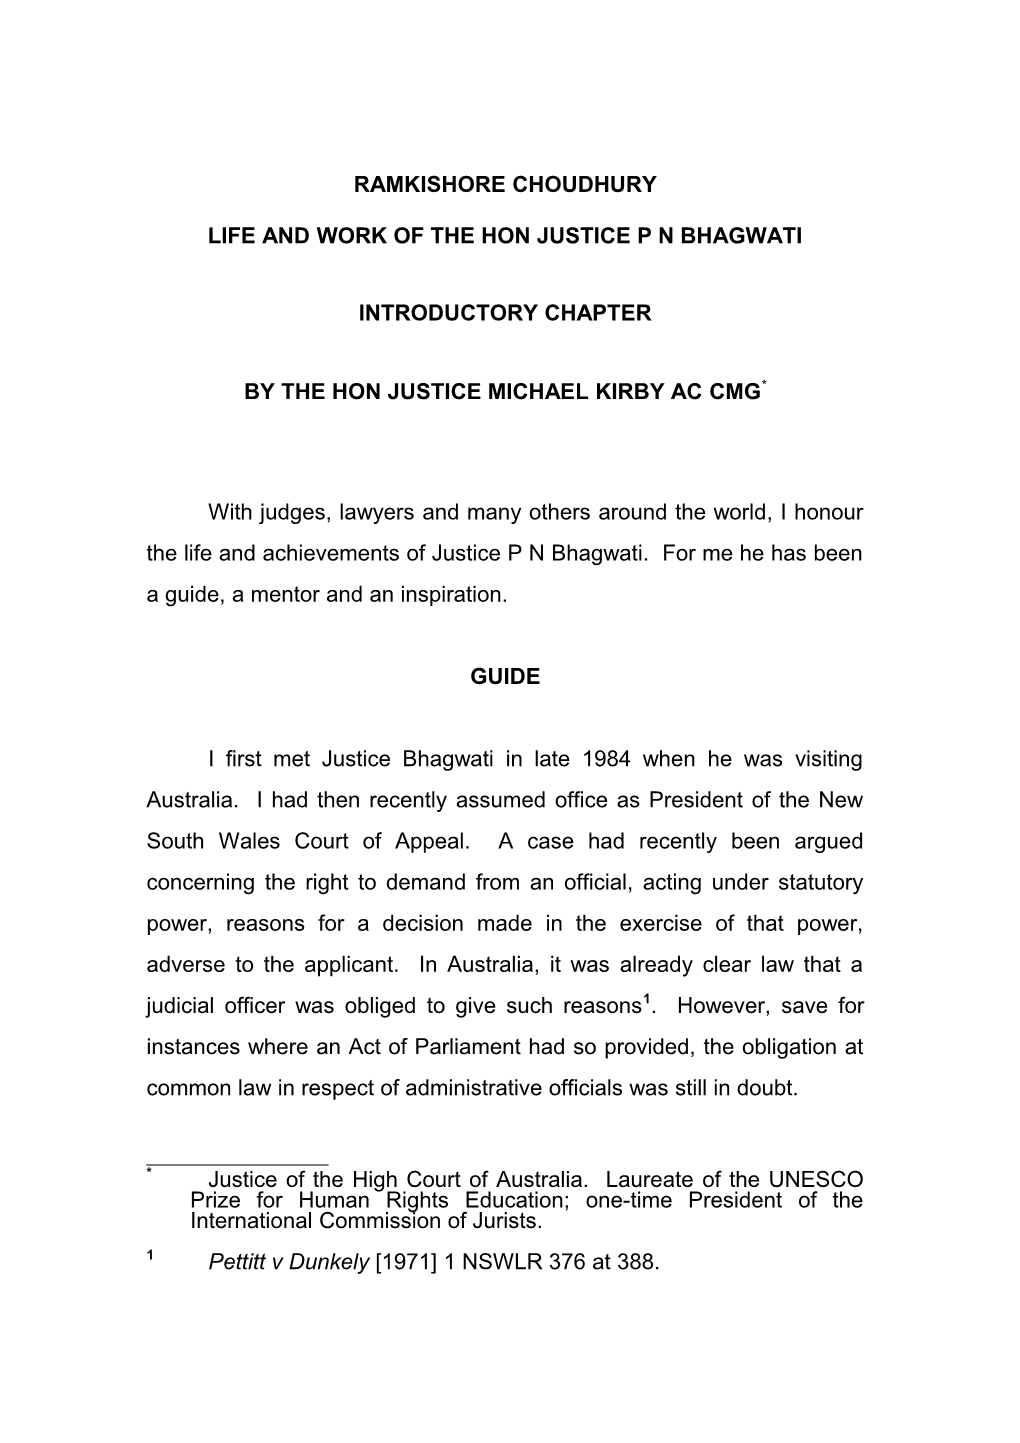 Life and Work of the Hon Justice P N Bhagwati